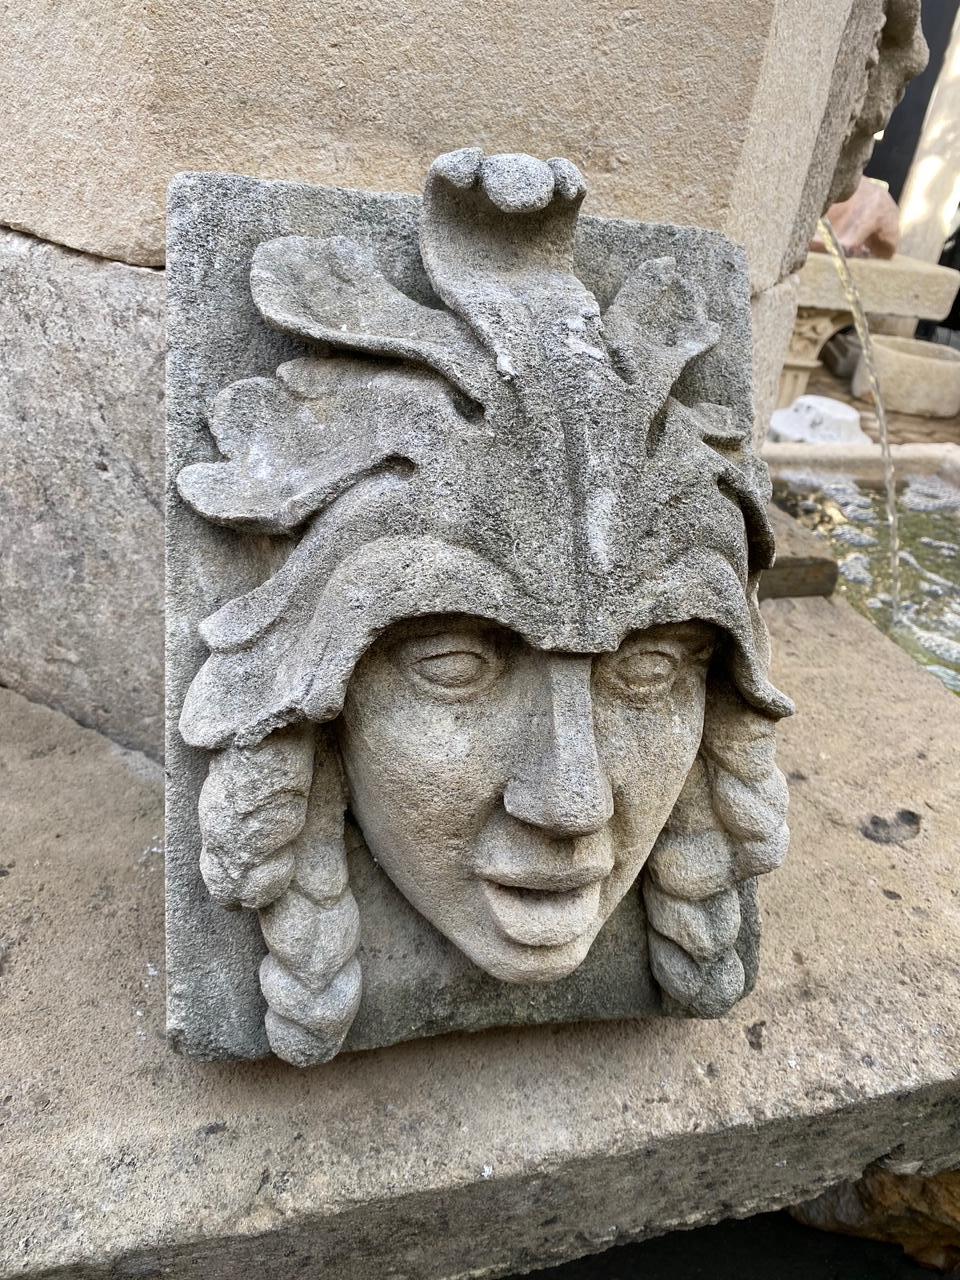 A beautiful sculpture hand carved fountain head of an Indian female warrior figure. It could be installed with a simple water spout or as is. You can pair it with a stone trough basin to create a charming garden water fountain feature we have many